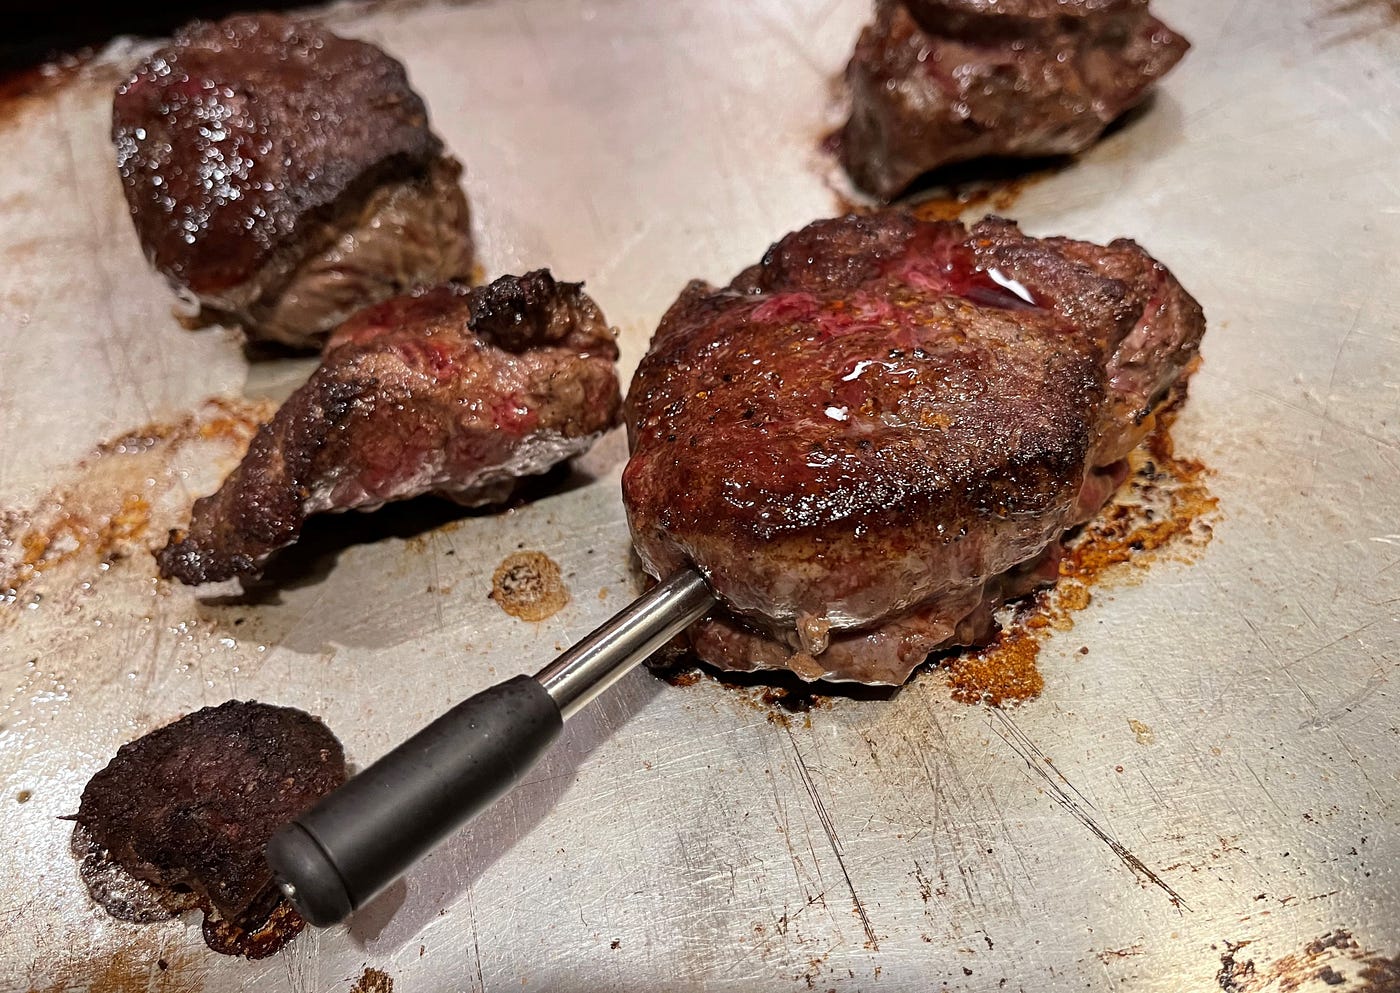 Yummly  Smart Thermometer on Instagram: Using your Yummly